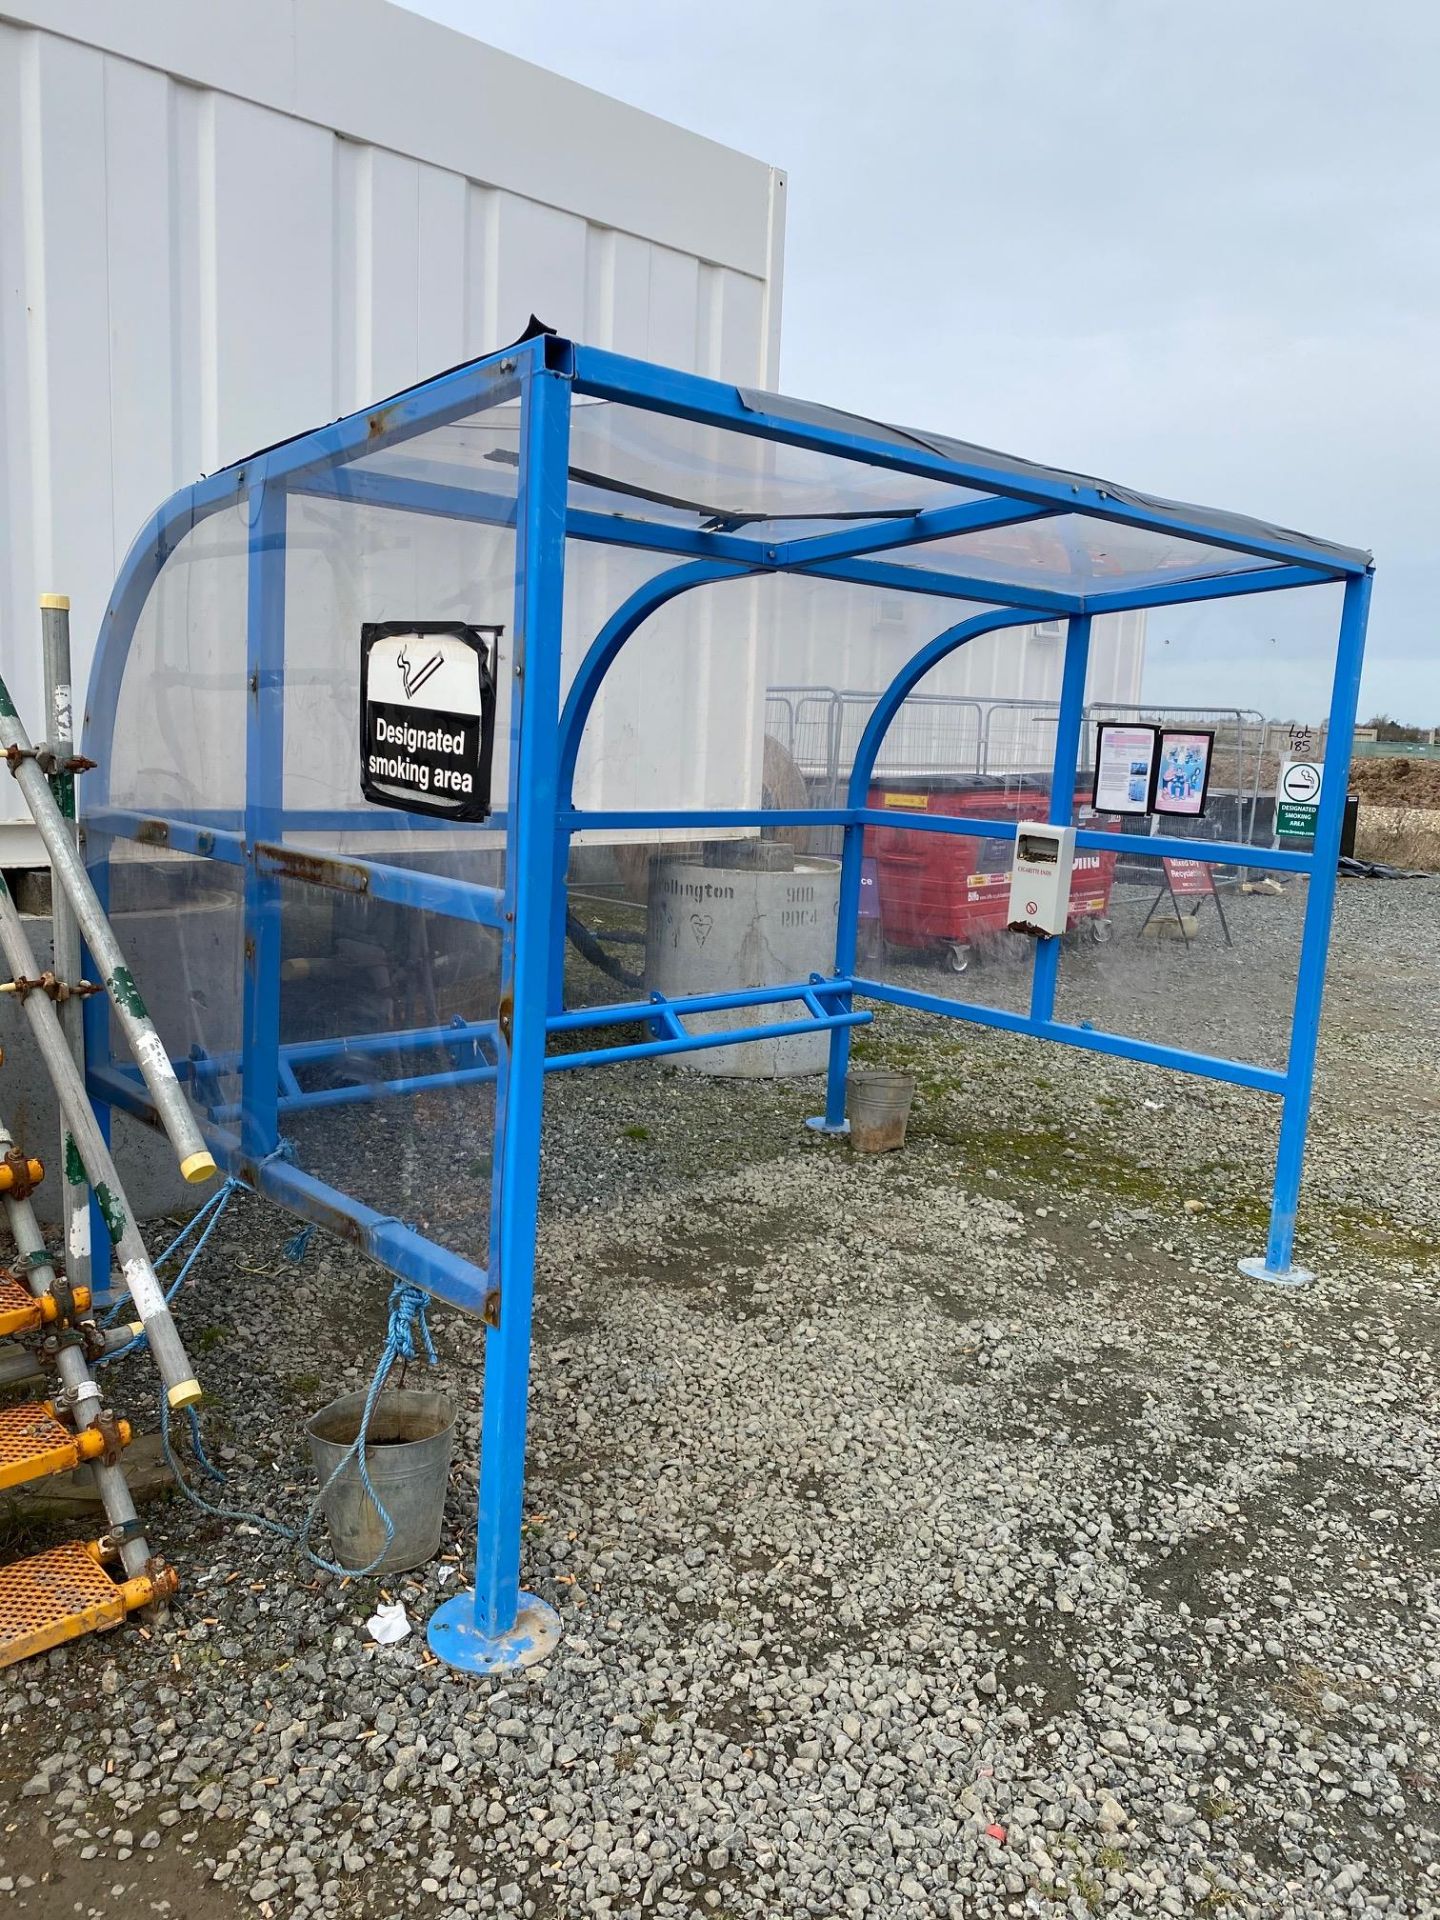 Smoking Shelter Blue Finished Steel Construction, Perch Rail Seat, with Clear Polycarbonate Panels